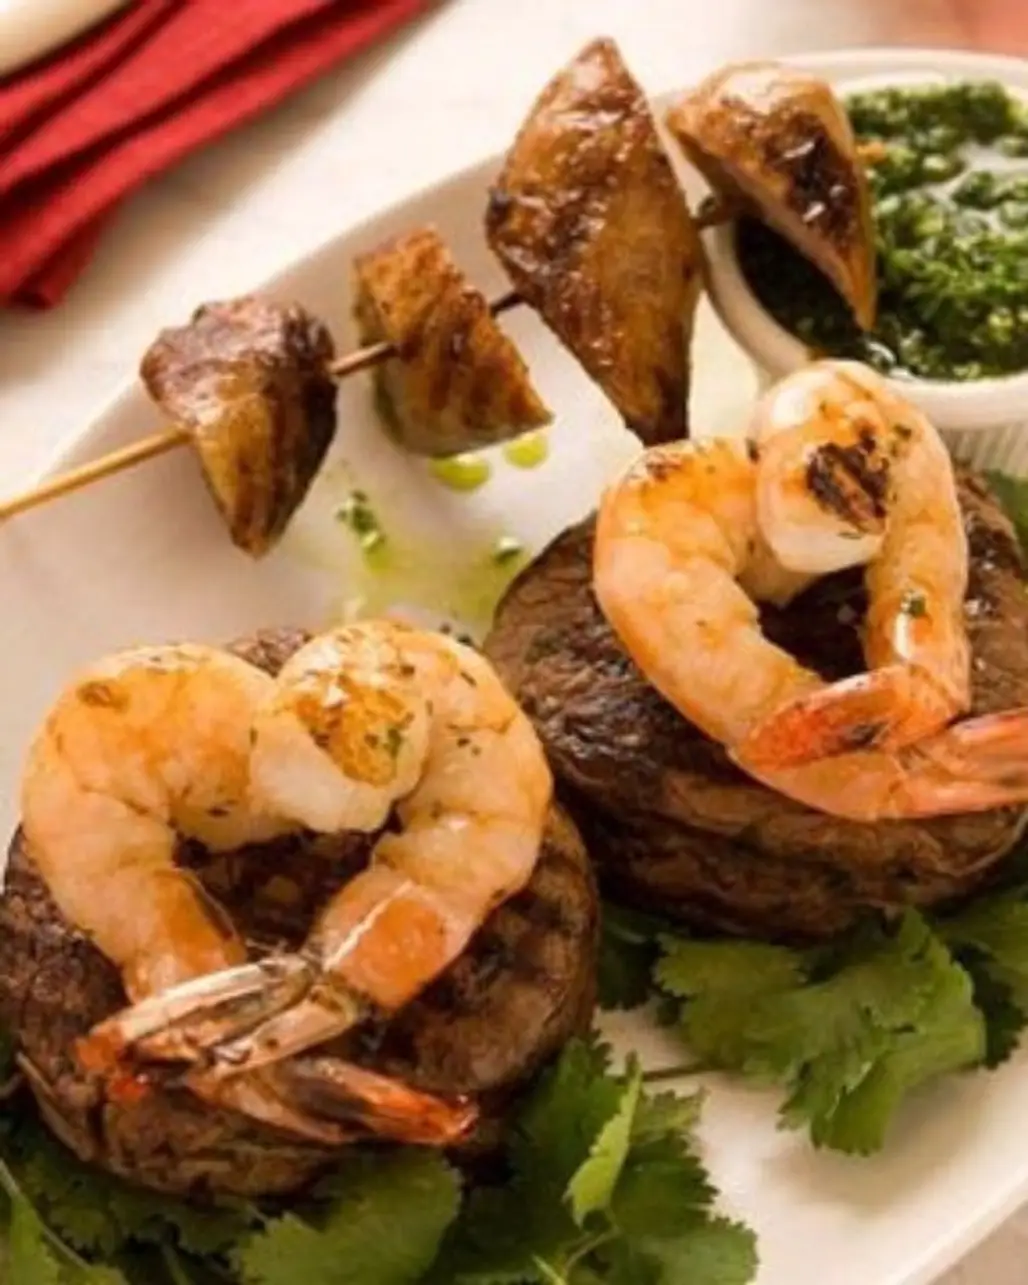 Shrimp on Steak with All the Sides